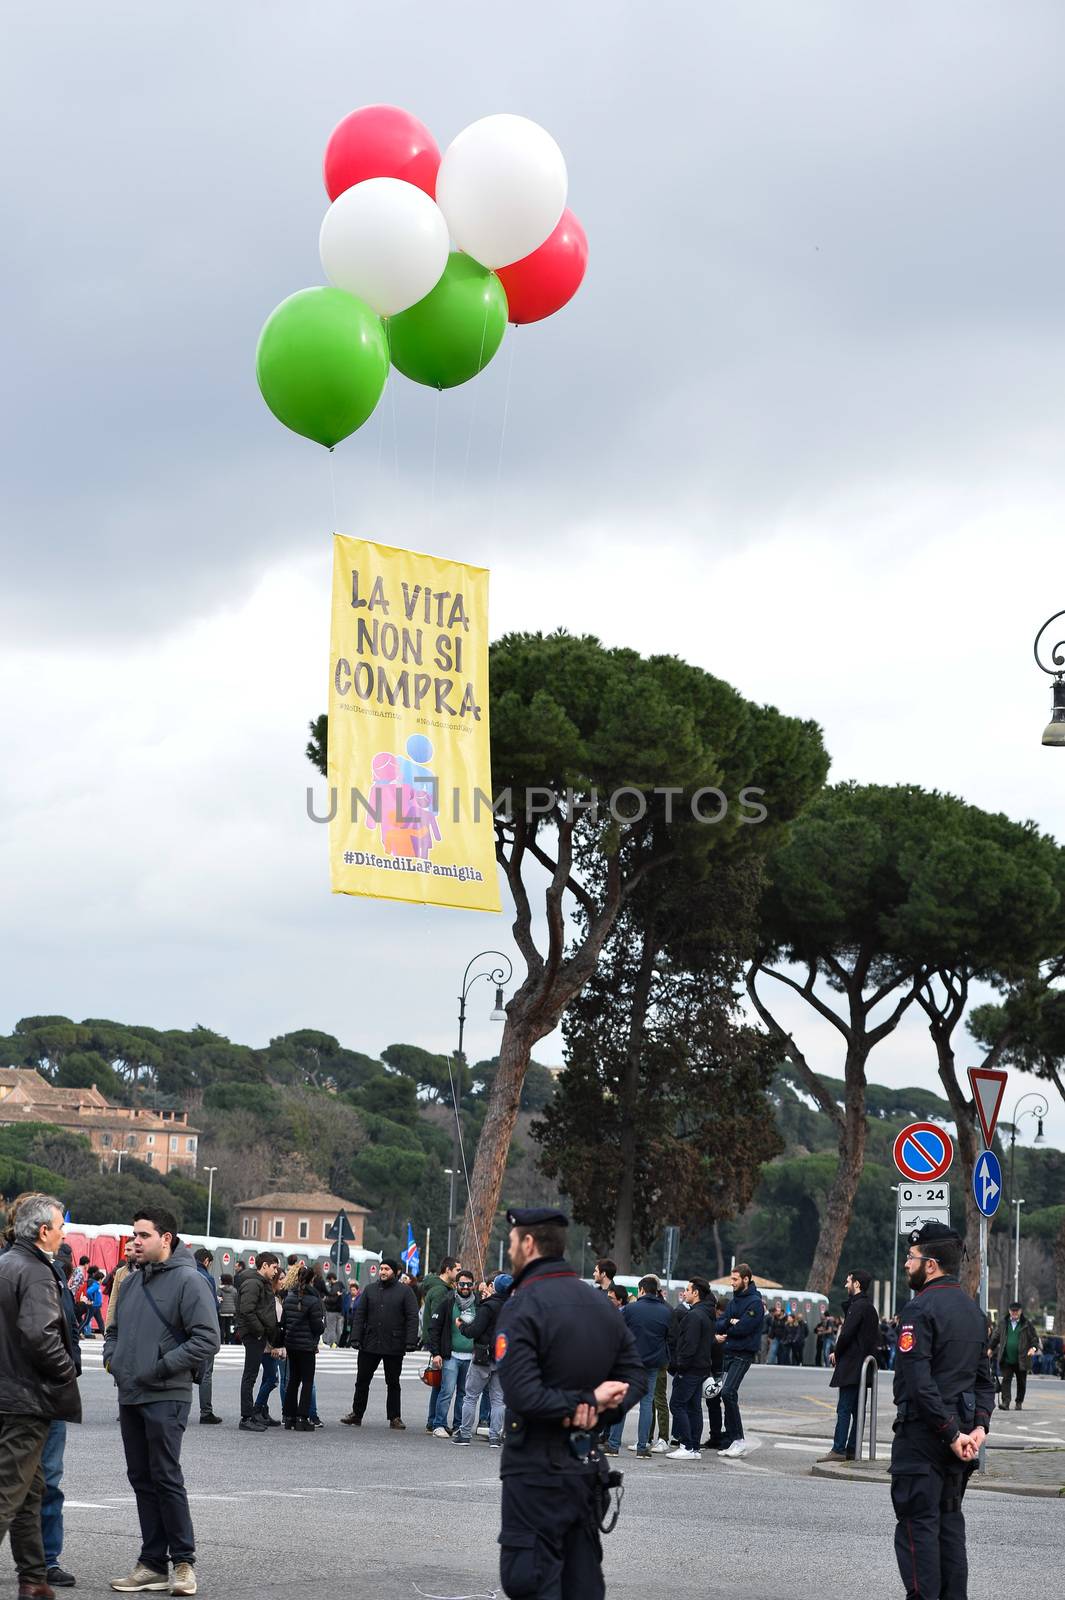 ITALY, Rome: Police stand guard as italians gather in Rome's Circus Maximus arena on January 30, 2016 to protest against a civil unions bill for same-sex couples. The rally's organizers framed the protest as a 'family day' celebration in support of traditional marriage and has been backed by some members of the Catholic church. Lawmakers will vote next week on proposals that will allow gay couples with civil unions, and unmarried heterosexual couples, the same rights as they would have under marriage. Italy is the only nation in Western Europe that does not recognize same sex civil unions or gay marriage. 